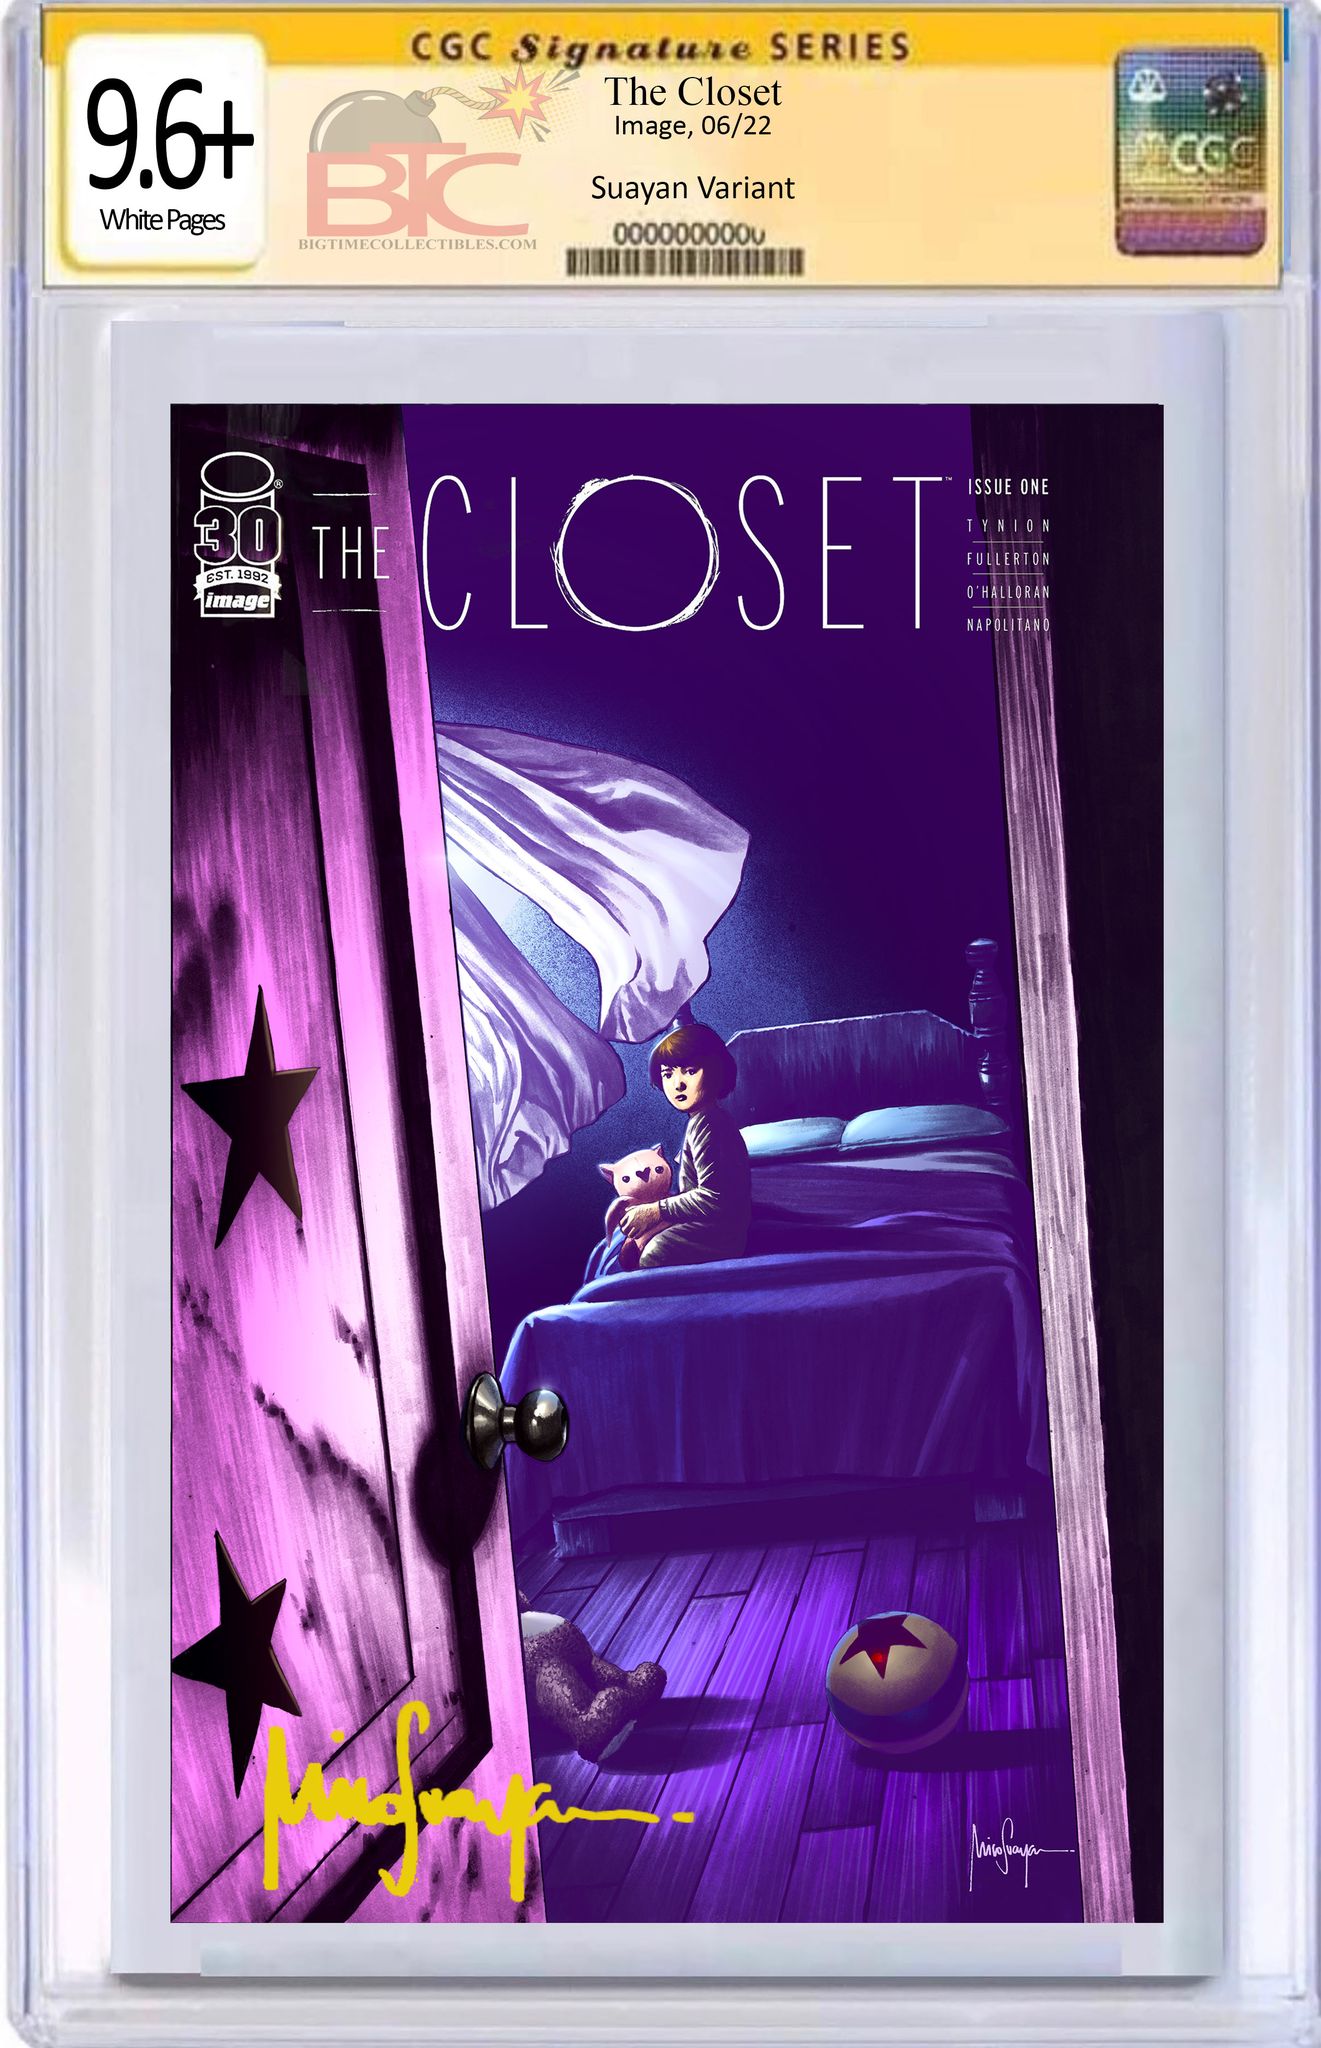 06/01/2022 CLOSET #1 MICO SUAYAN "BOO'S ROOM" EXCLUSIVE VARIANT OPTIONS (I4)